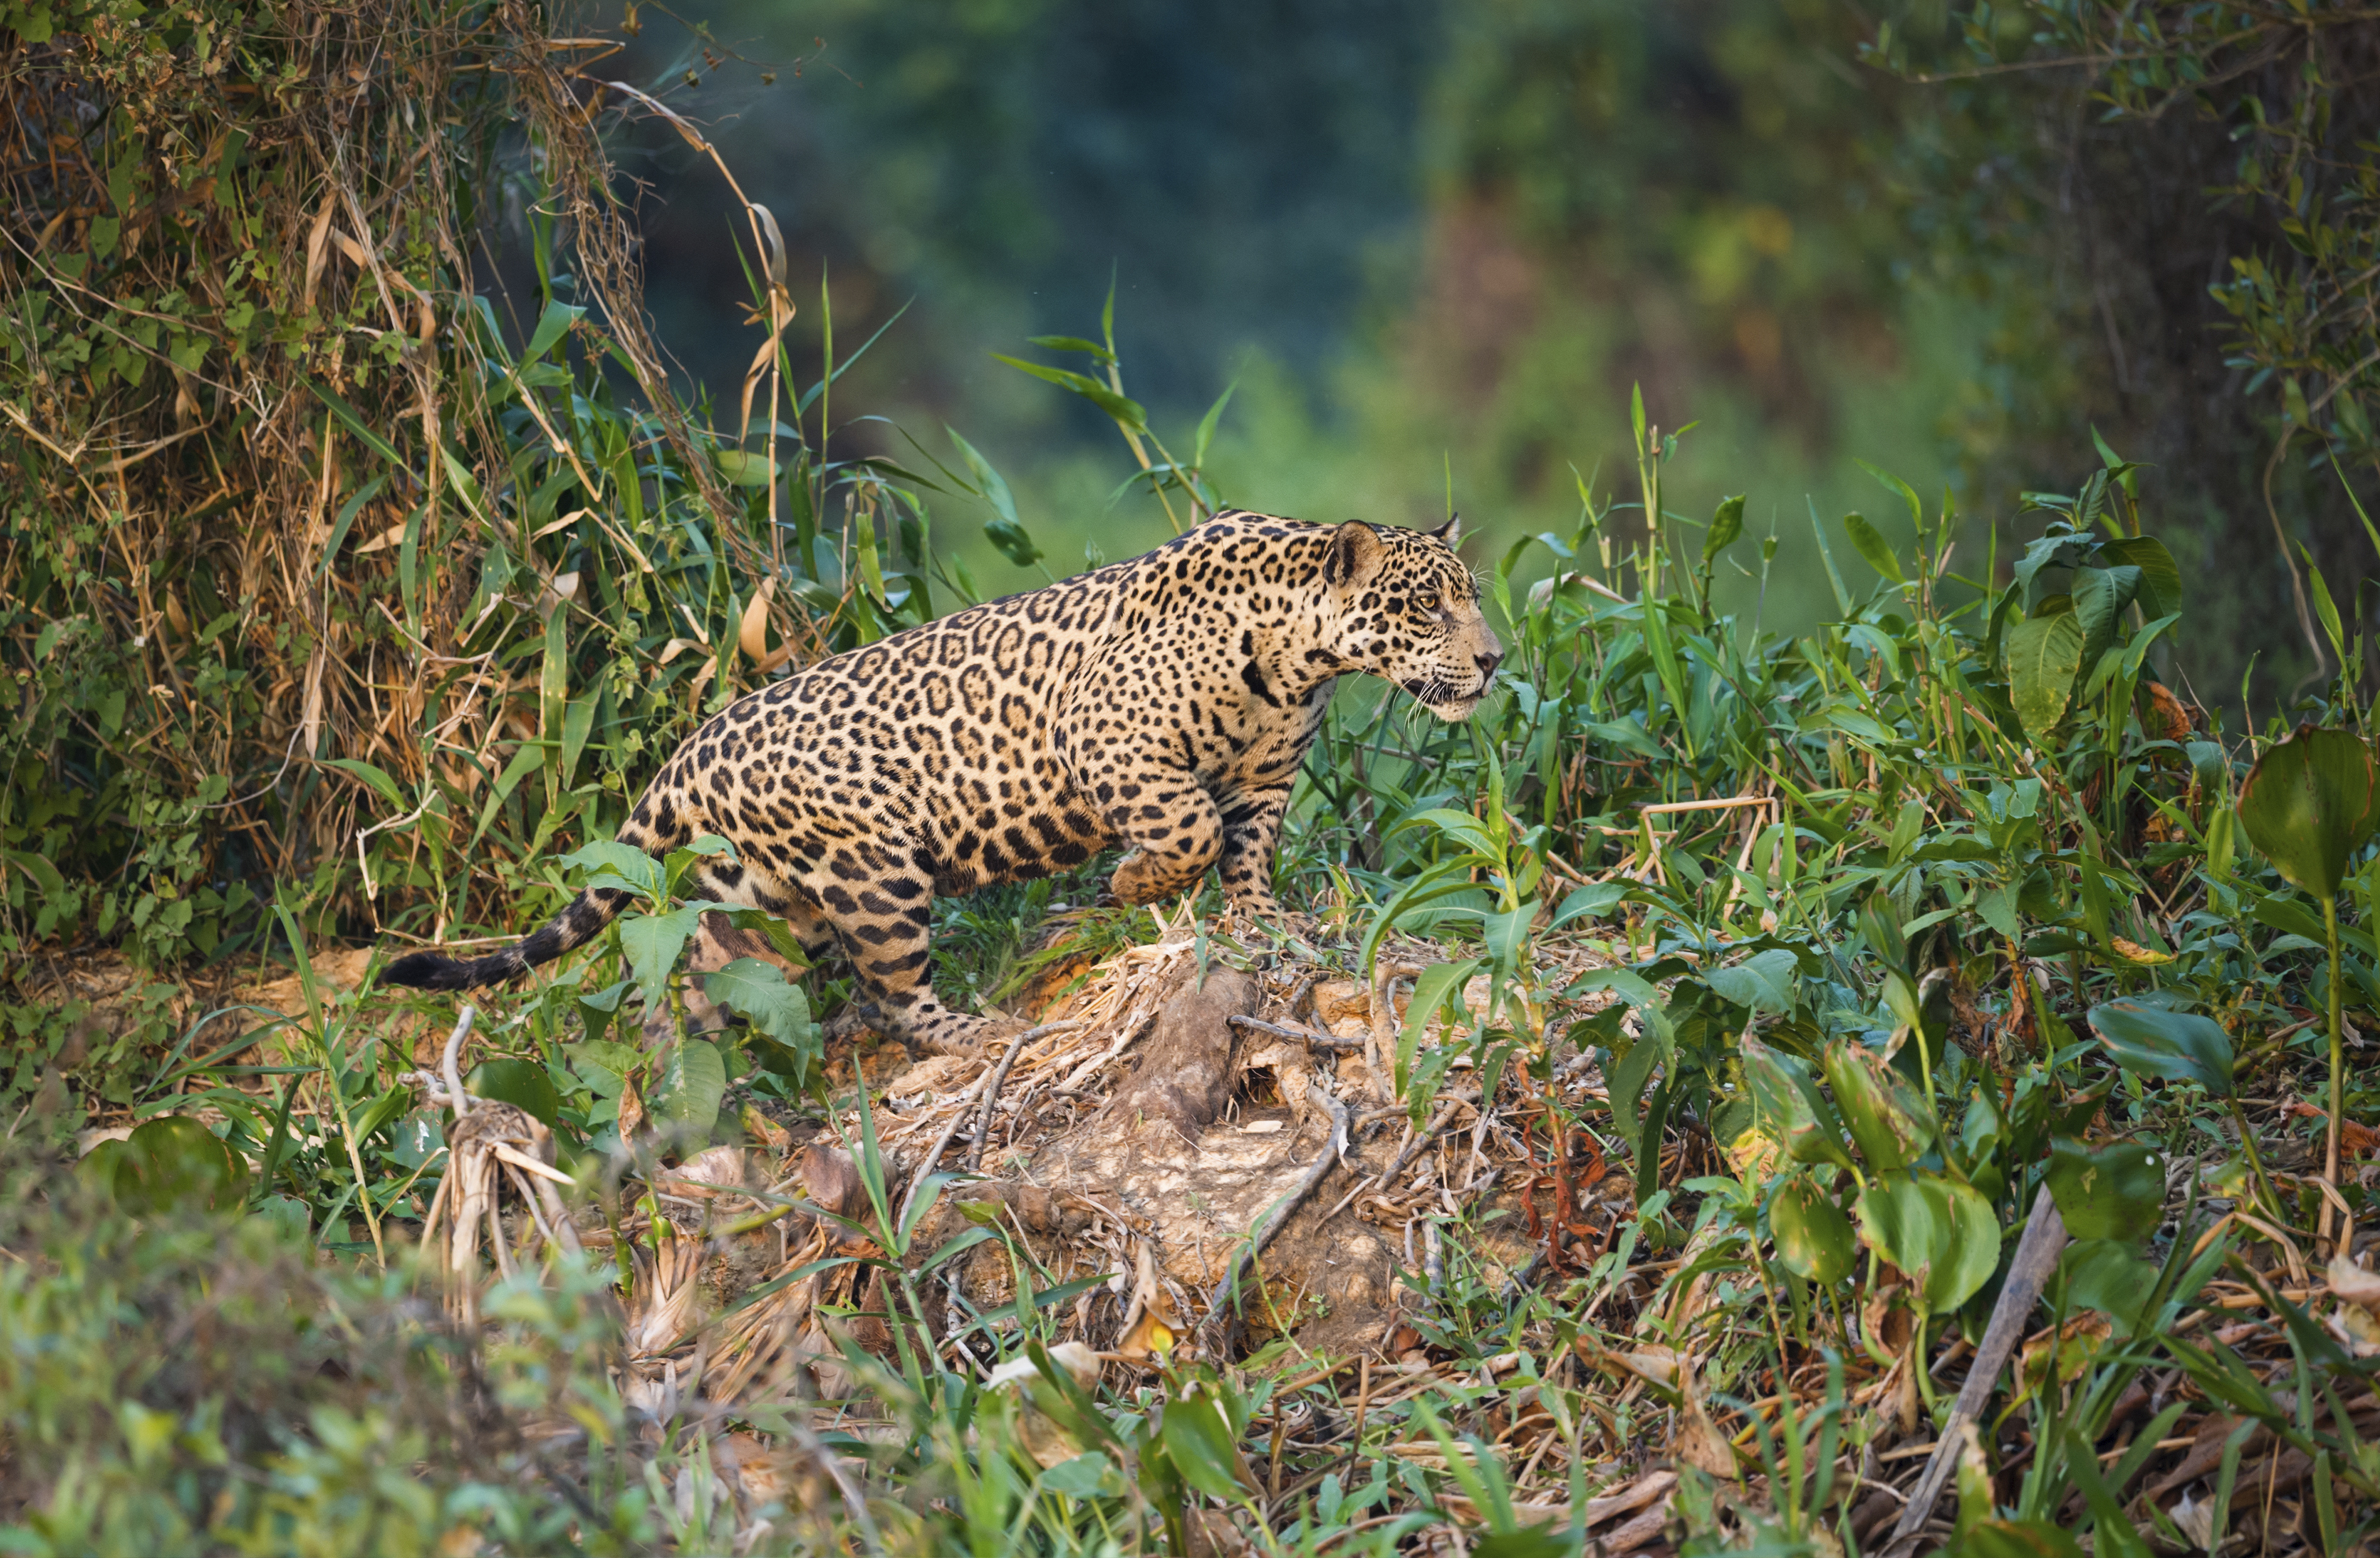 "WILD MALE JAGUAR STALKING ALONG THE BANK OF THE CUIABA RIVER IN LATE AFTERNOON SUN LIGHT. NORTHERN PANTANAL, BRAZIL."